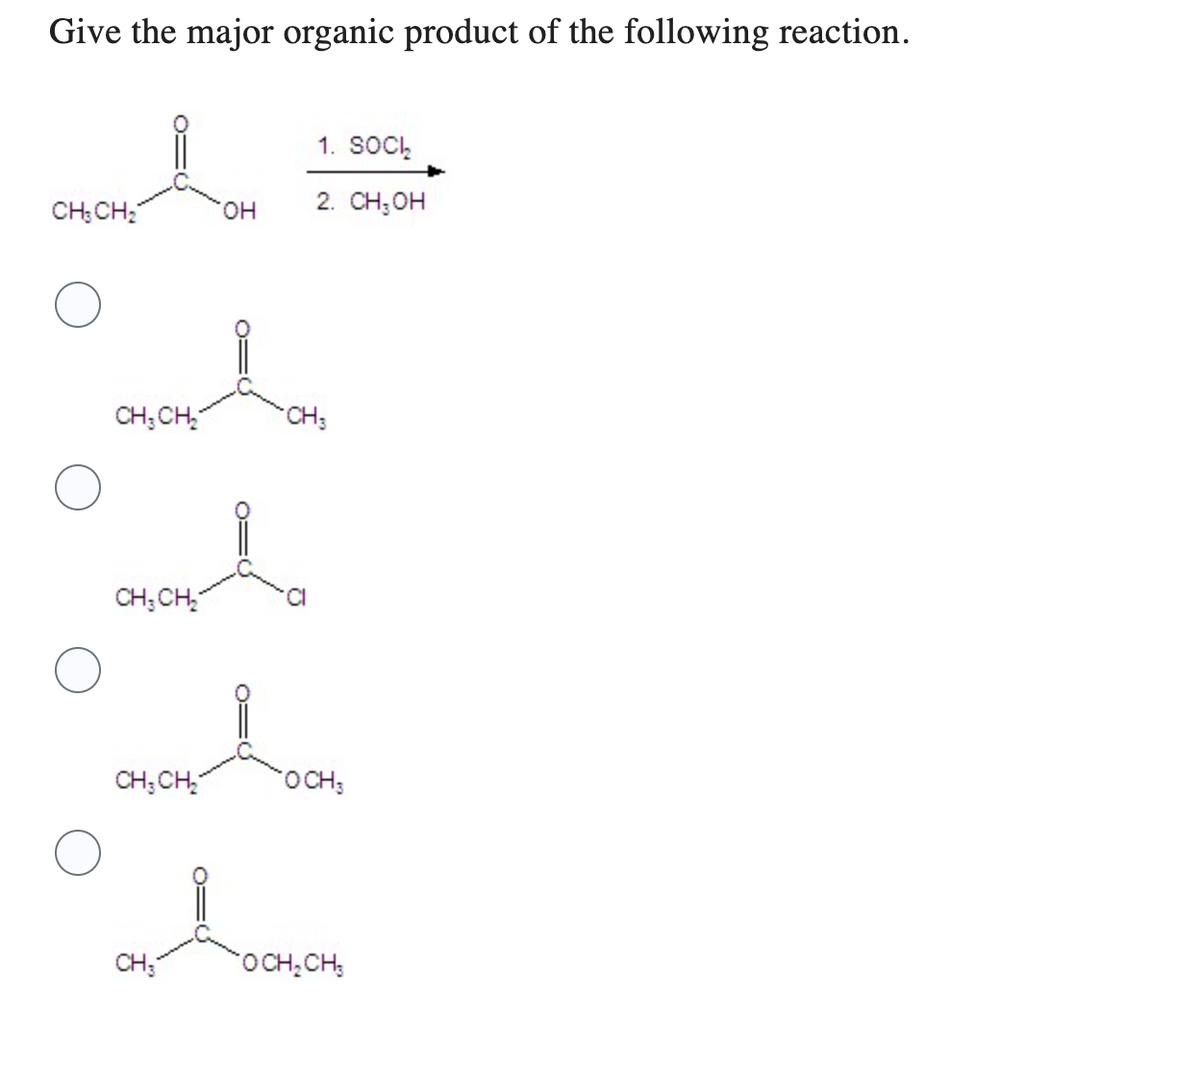 Give the major organic product of the following reaction.
CH3 CH₂
CH₂ CH₂
CH₂ CH₂
CH₂CH₂
CH3
OH
O=
O=(
1. SOCI
2. CH₂OH
CH3
OCH3
OCH,CH